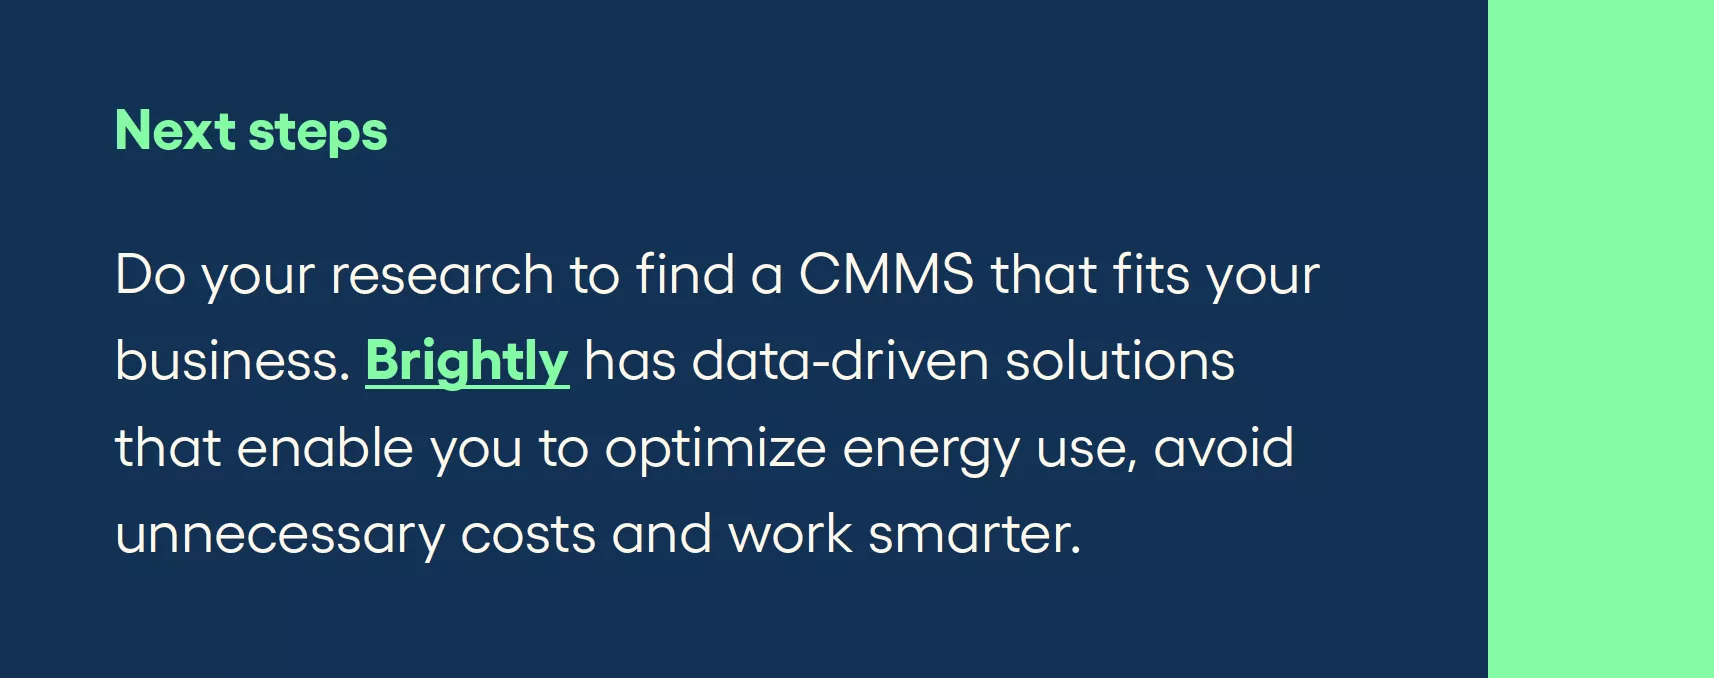 Next steps Do your research to find a CMMS that fits your business. Brightly has data-driven solutions that enable you to optimize energy use, avoid unnecessary costs and work smarter.